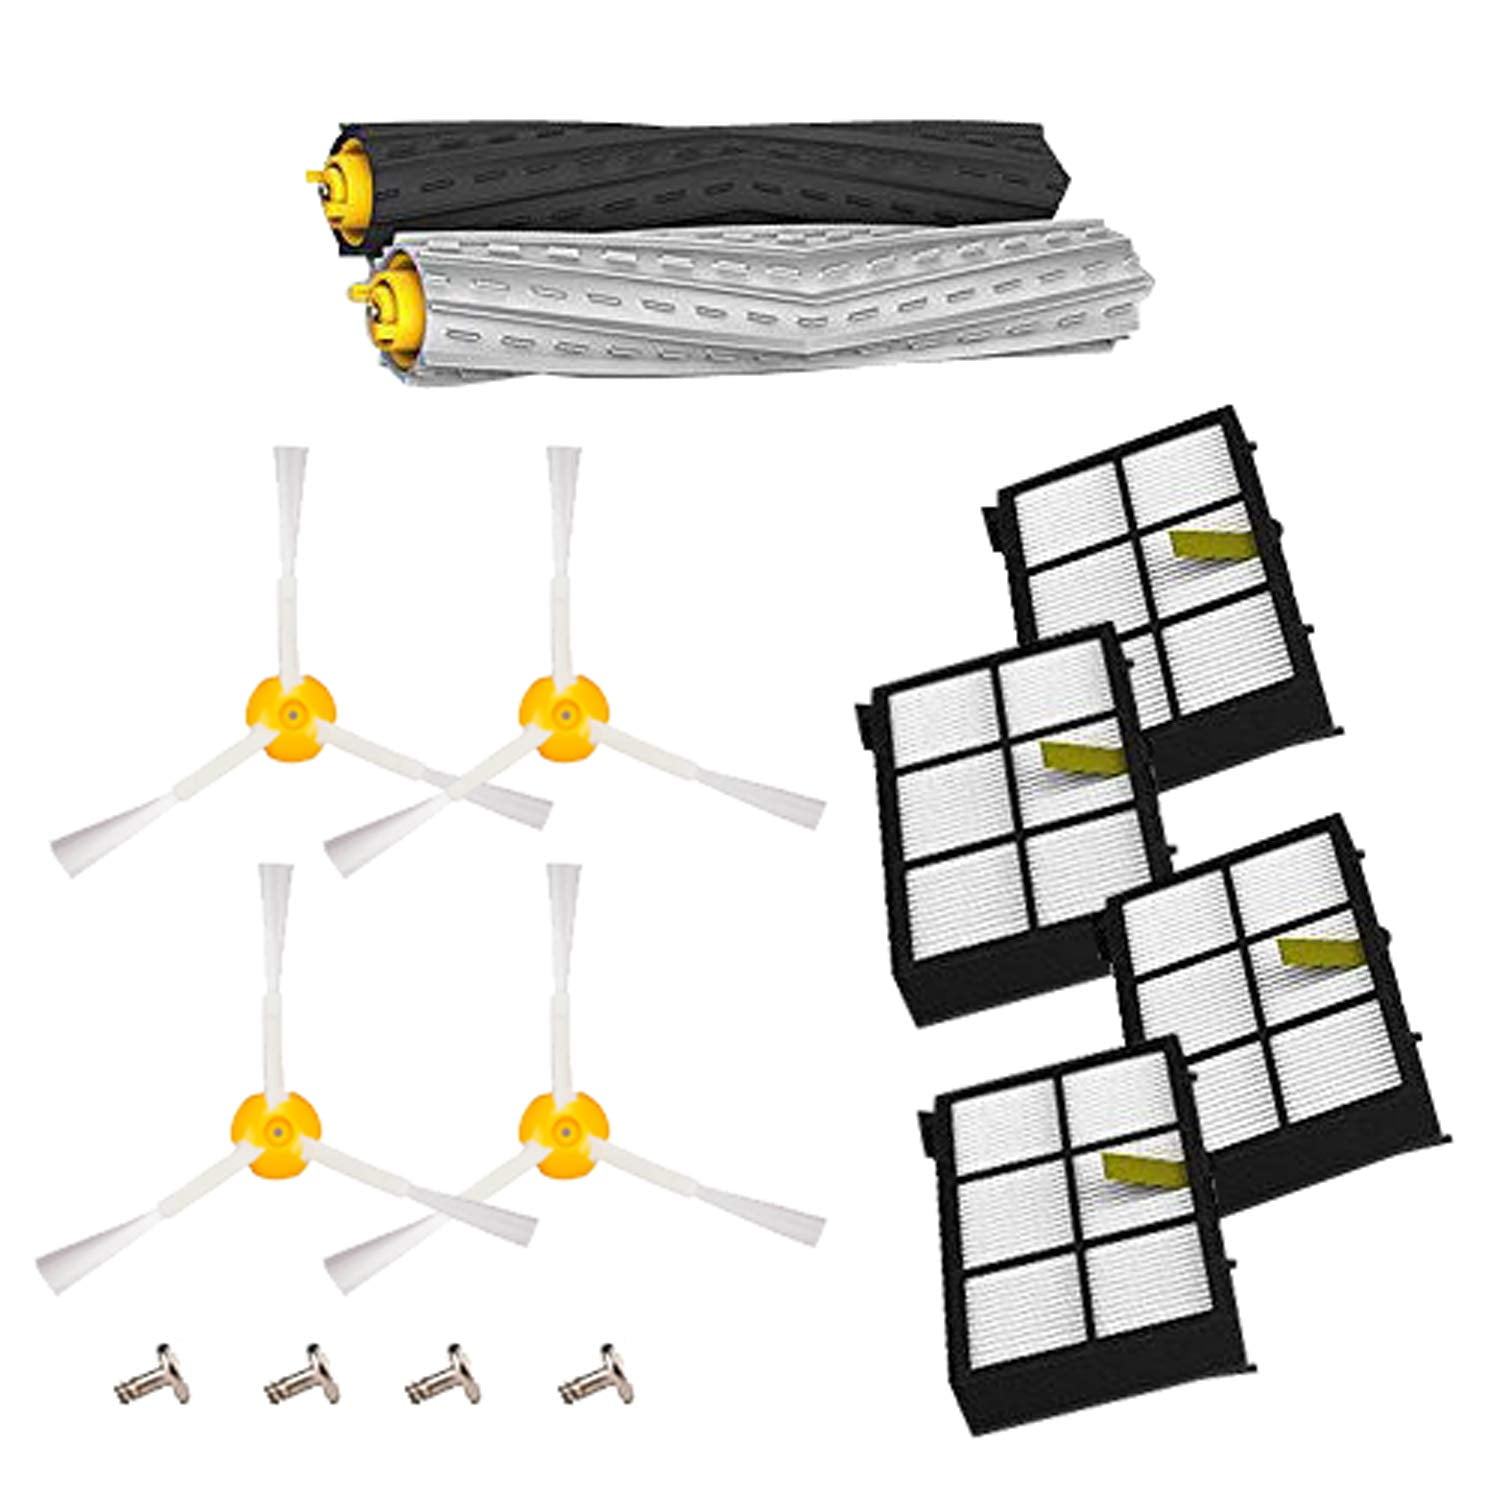 New Replacement Accessories for iRobot Roomba 800 870 880 900 980 Brushes Kit 